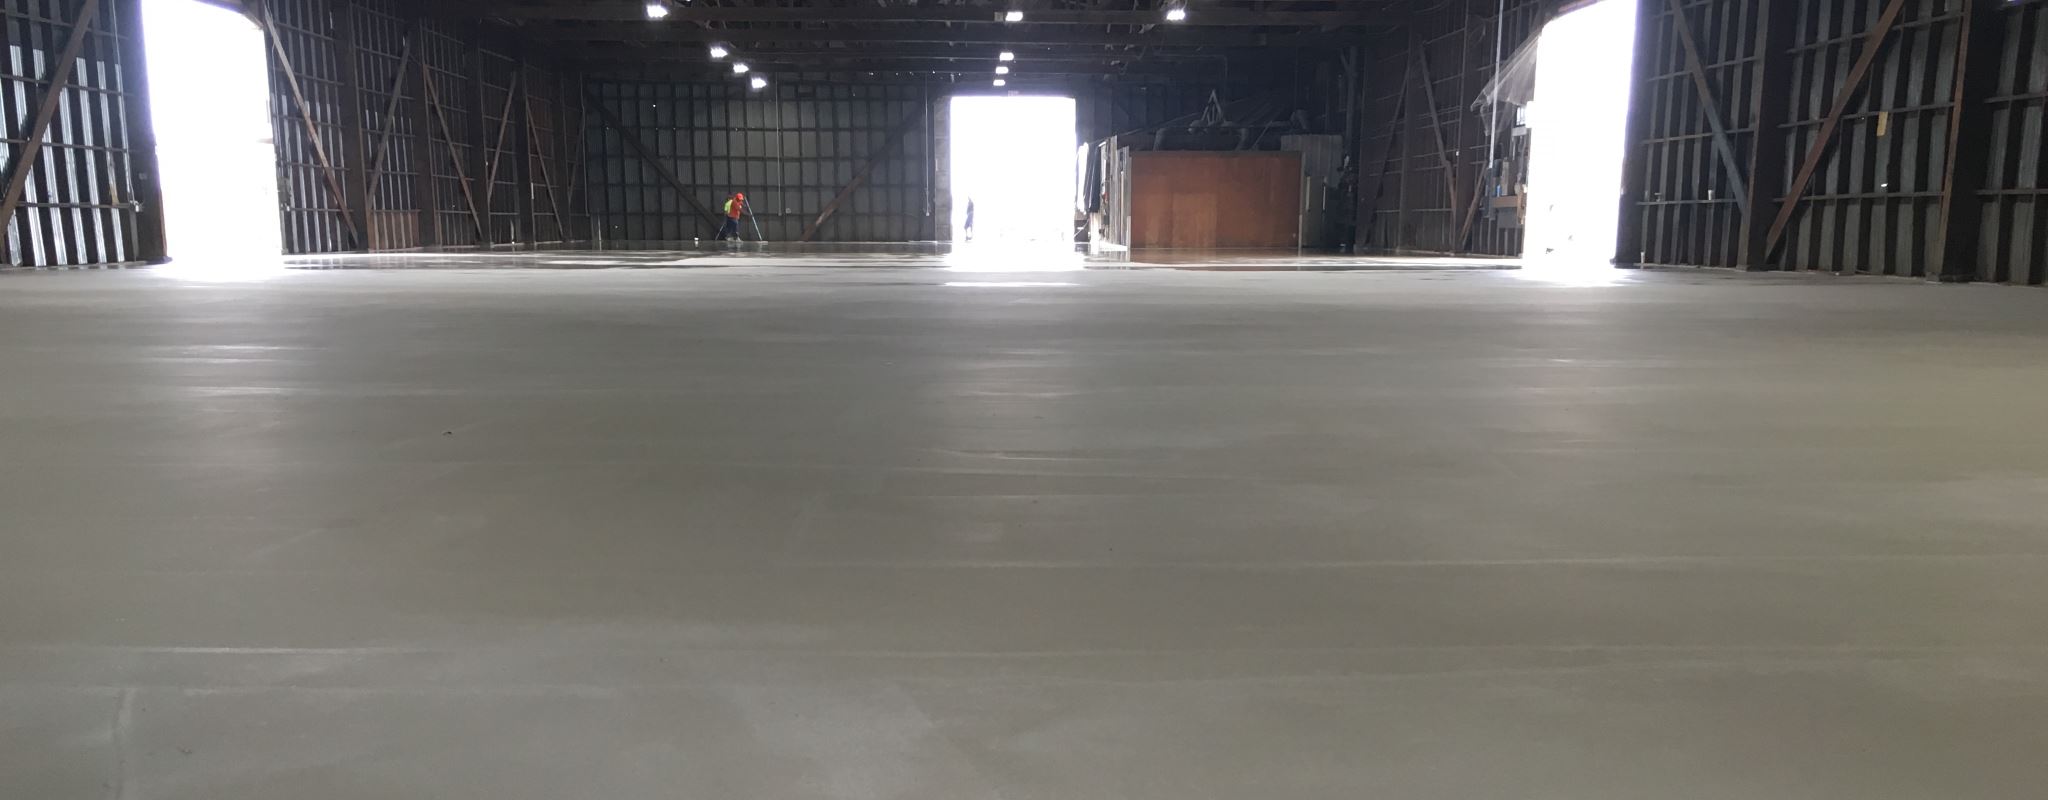 Finished floor at Tarps & Tie Downs